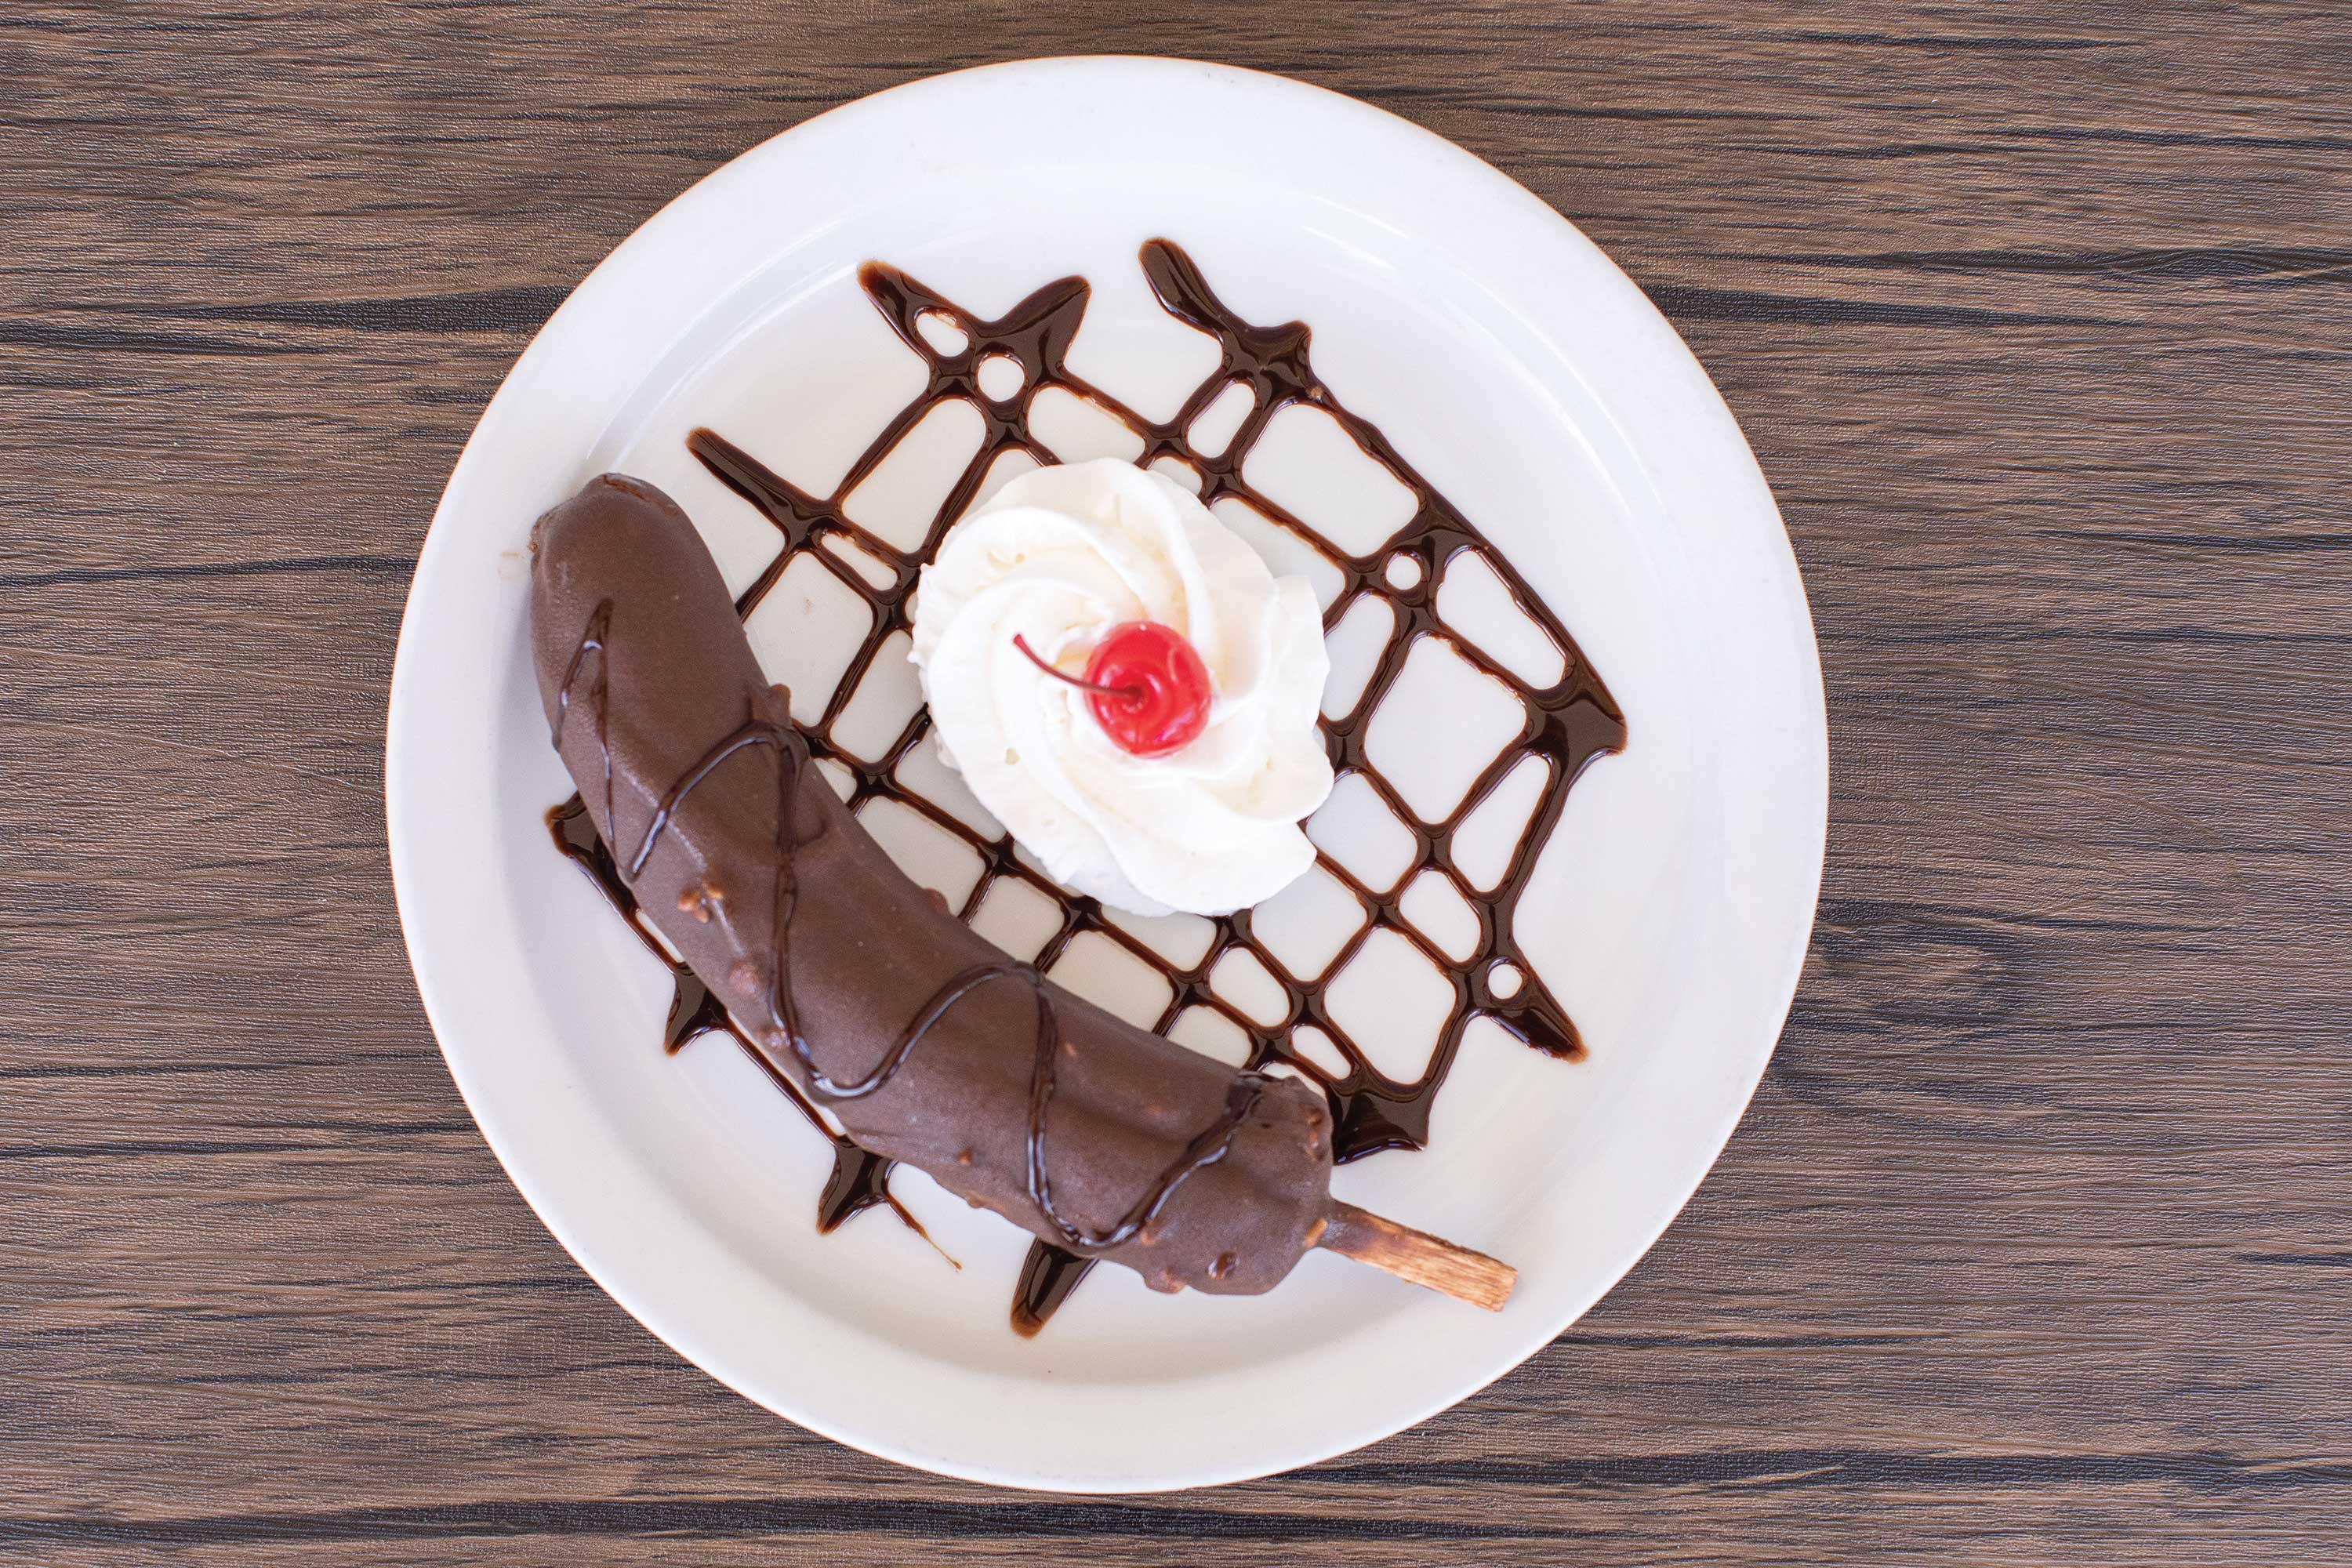 Image: A chocolate covered banana on a stick is set on a white plate alongside a mound of whipped cream topped with a cherry. Chocolate sauce is drizzled over the plate in a decorative pattern.